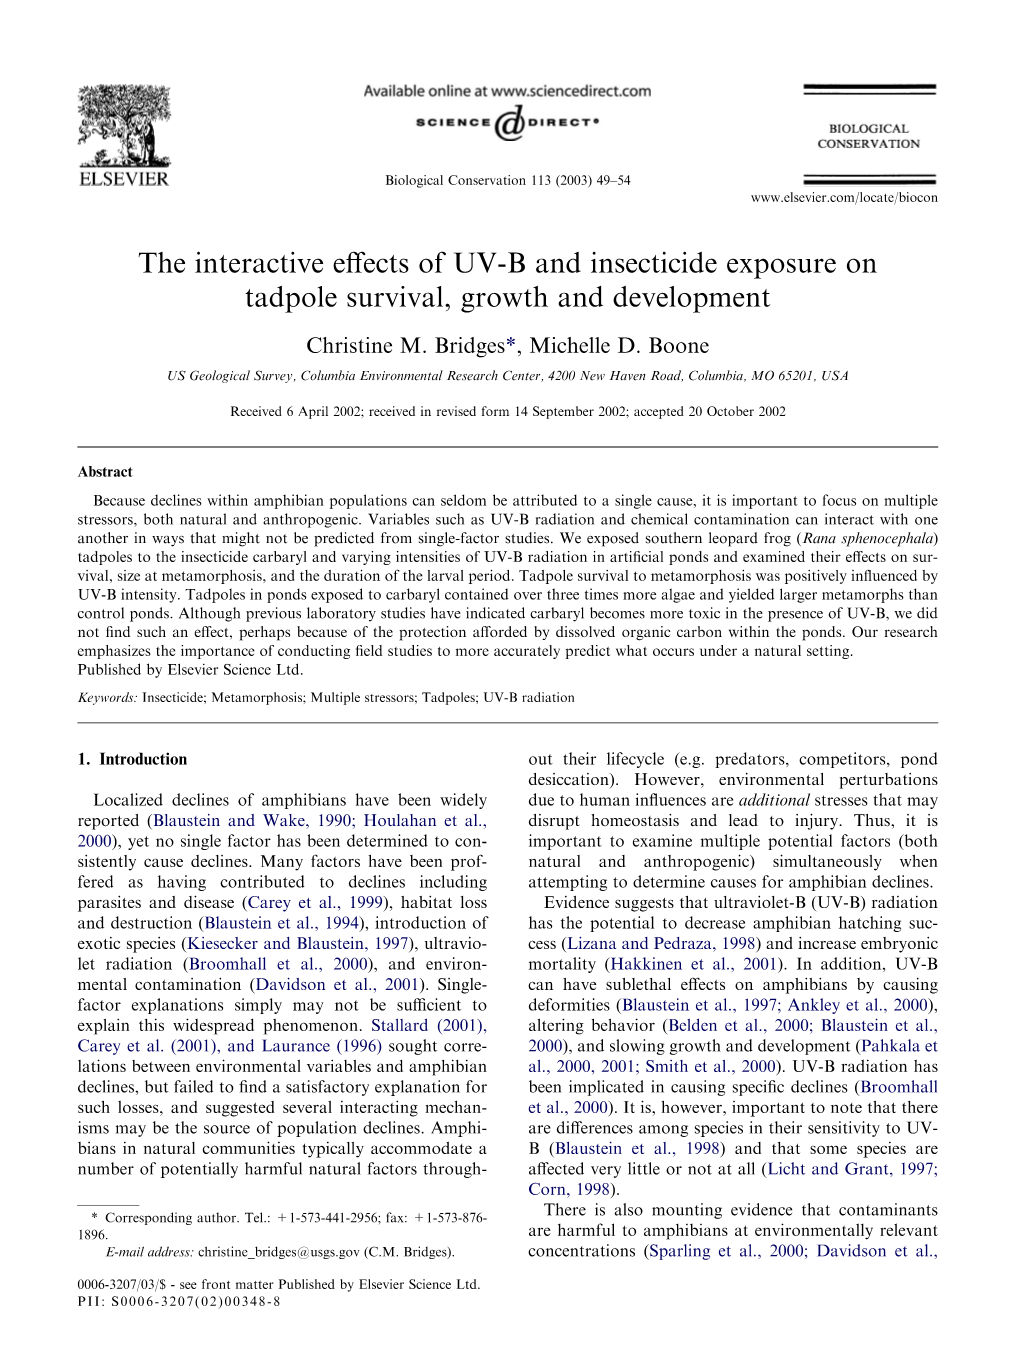 The Interactive Effects of UV-B and Insecticide Exposure on Tadpole